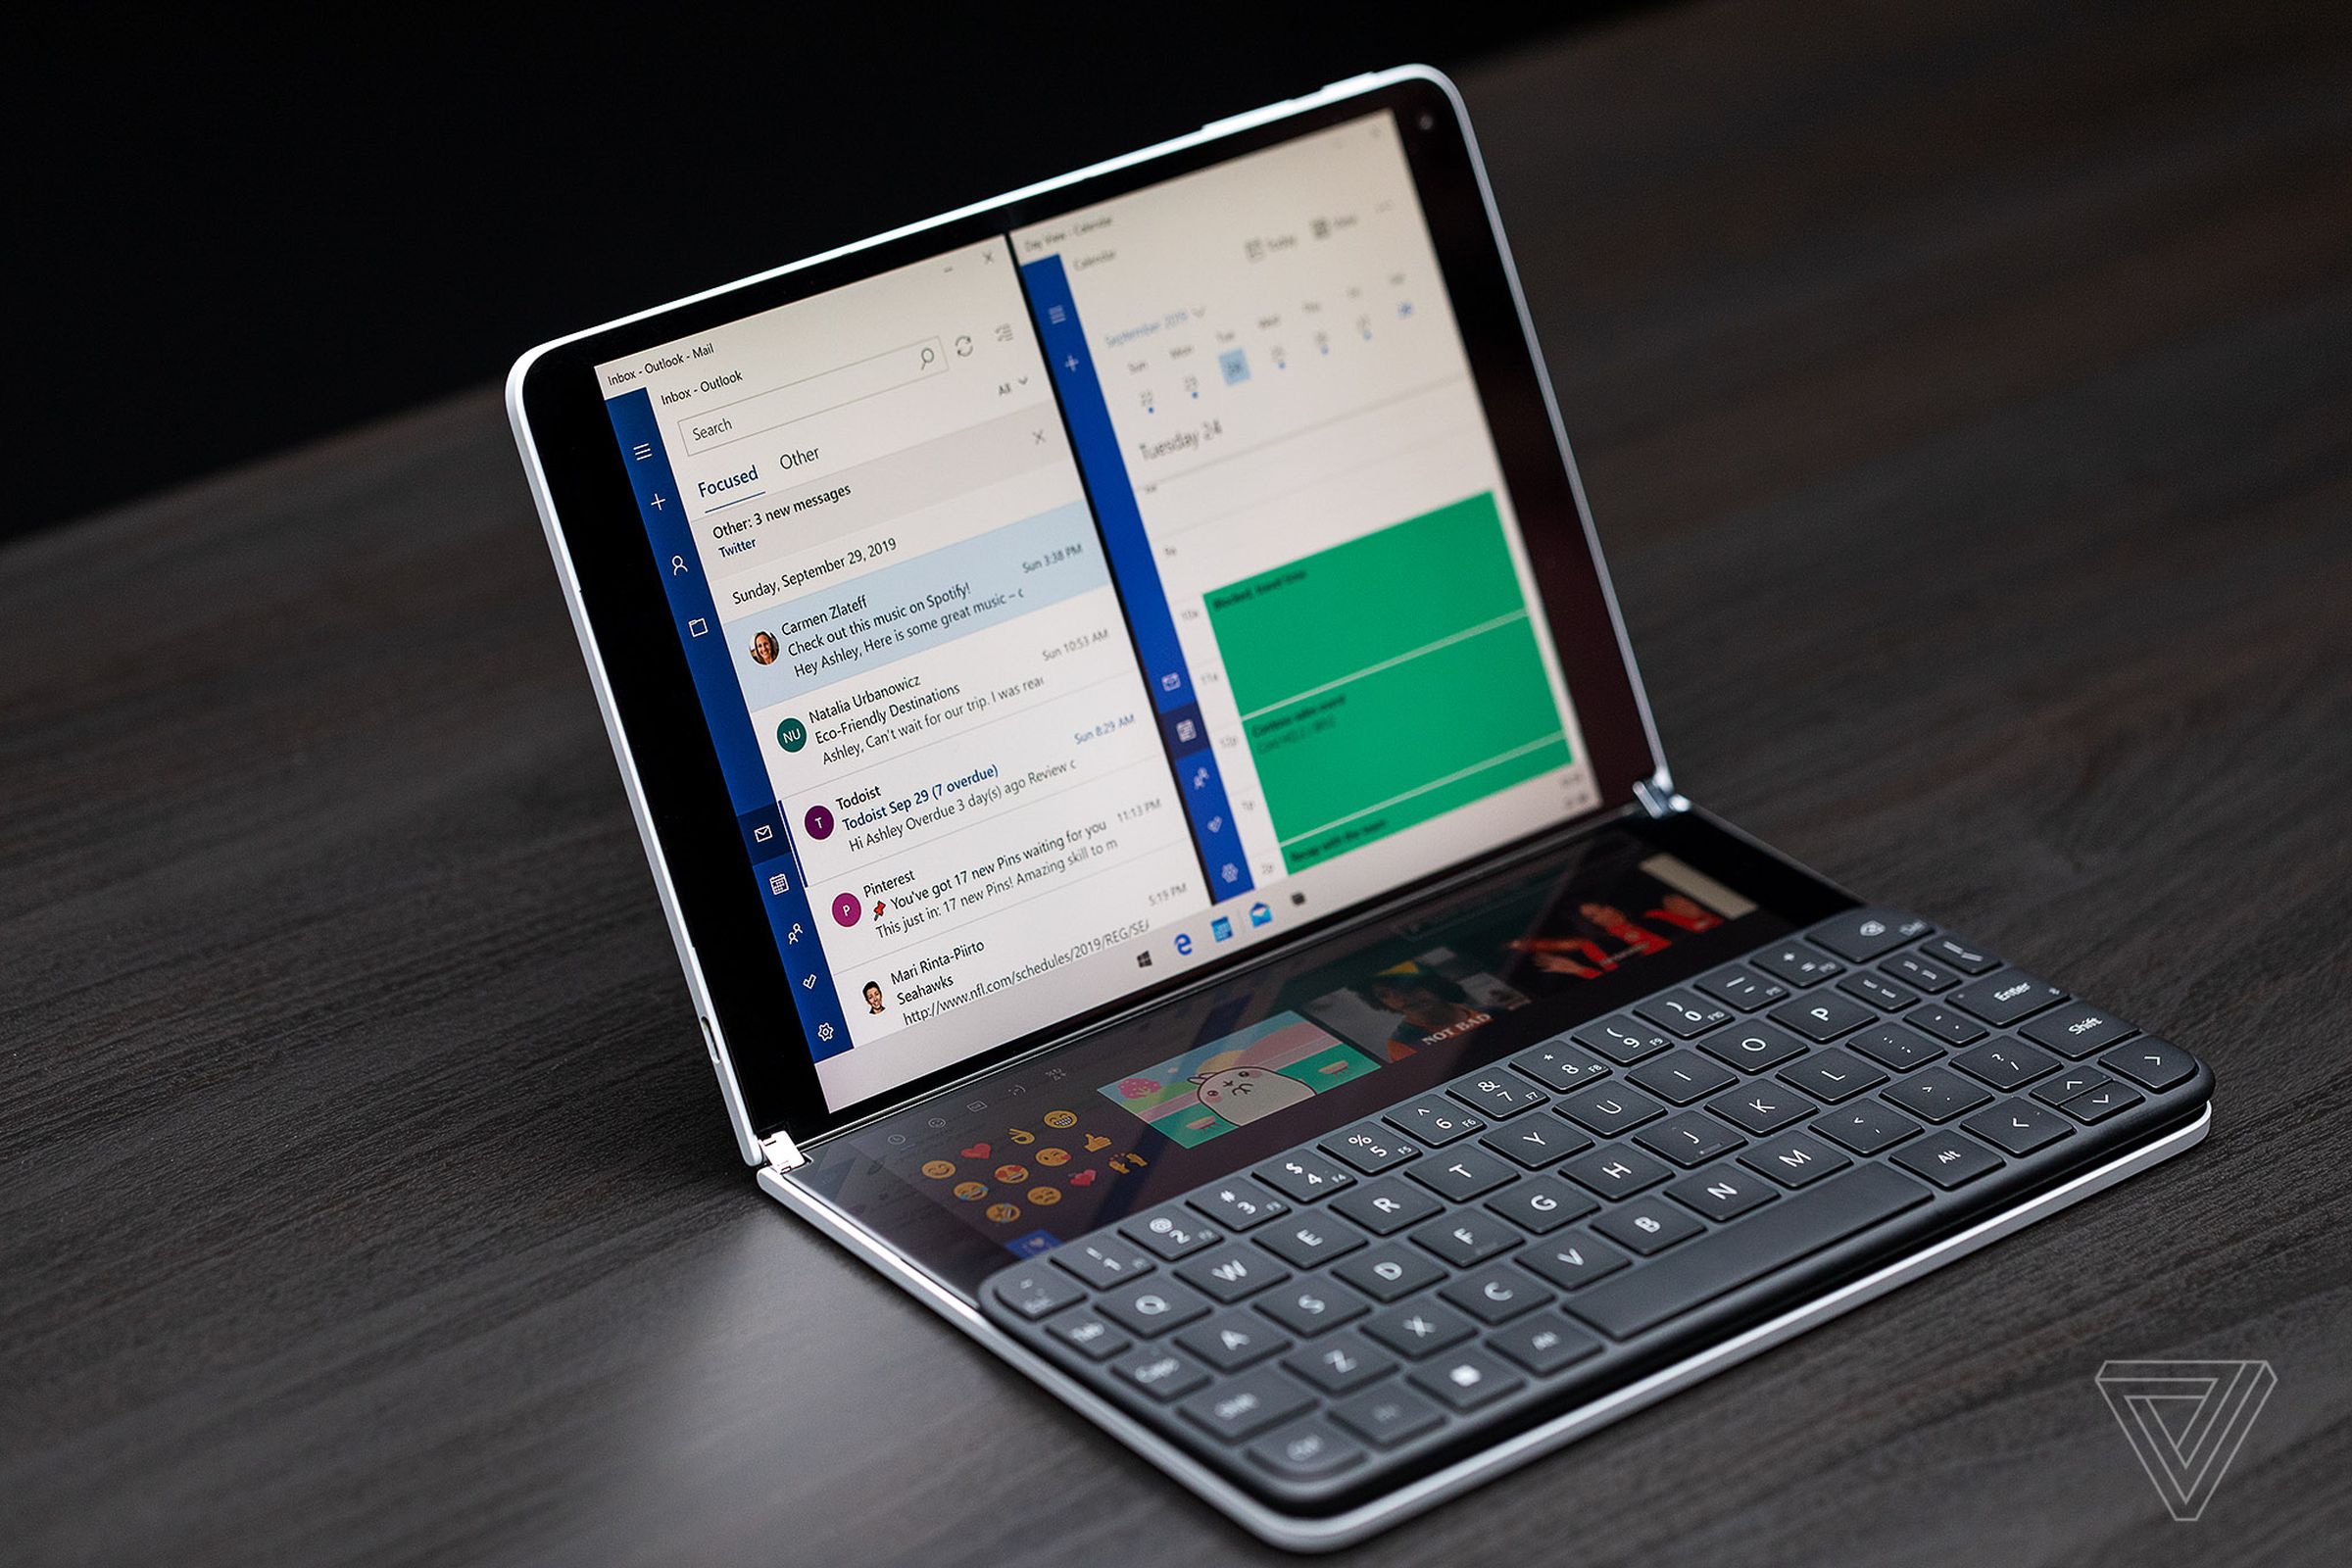 Will we continue to see Microsoft experiment boldly with Surface hardware like the canceled Neo?